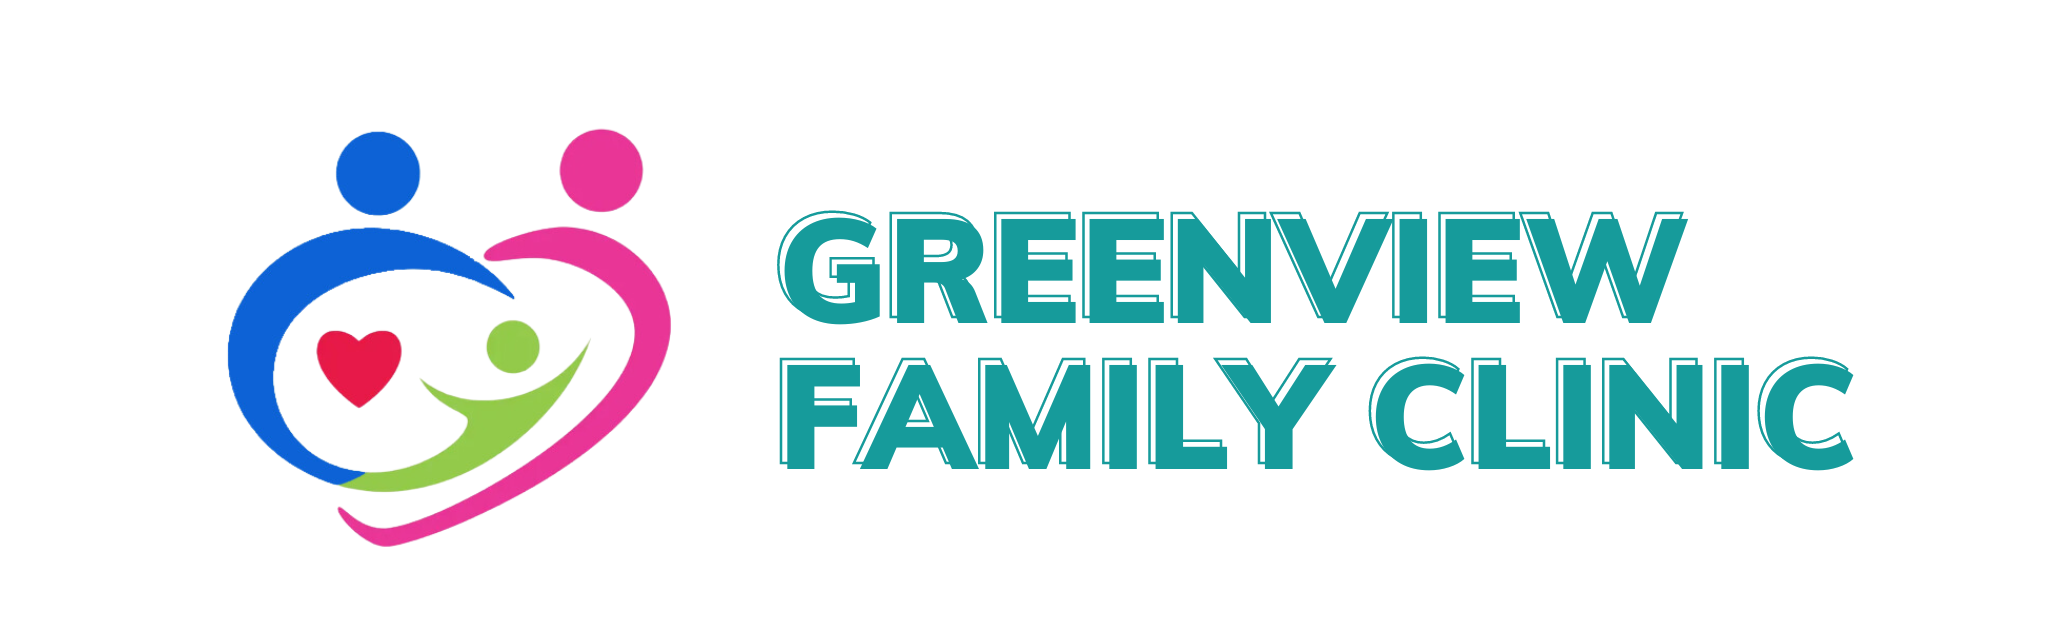 Greenview Family Clinic